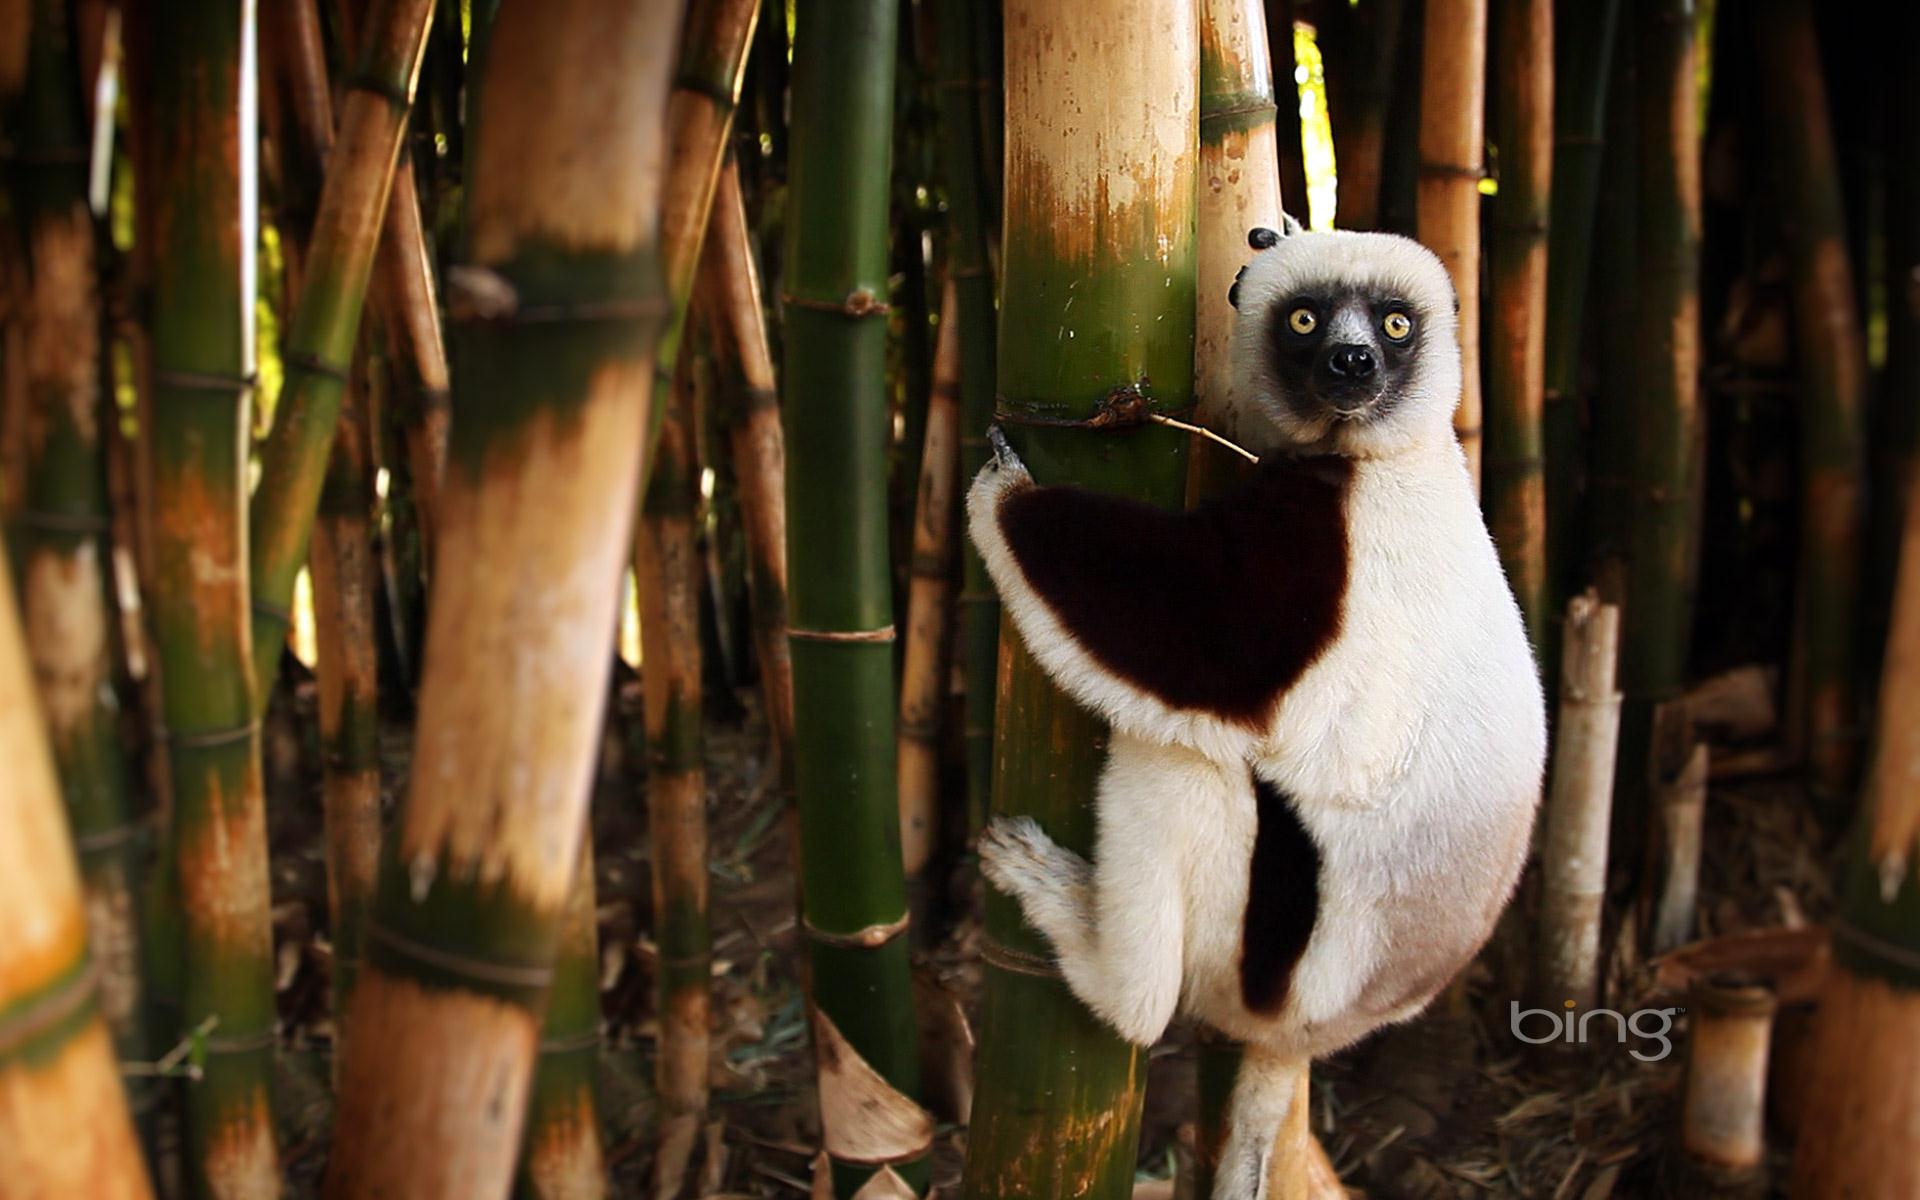 Free Download On A Bamboo Tree Madagascar Bing Wallpaper Of The Day